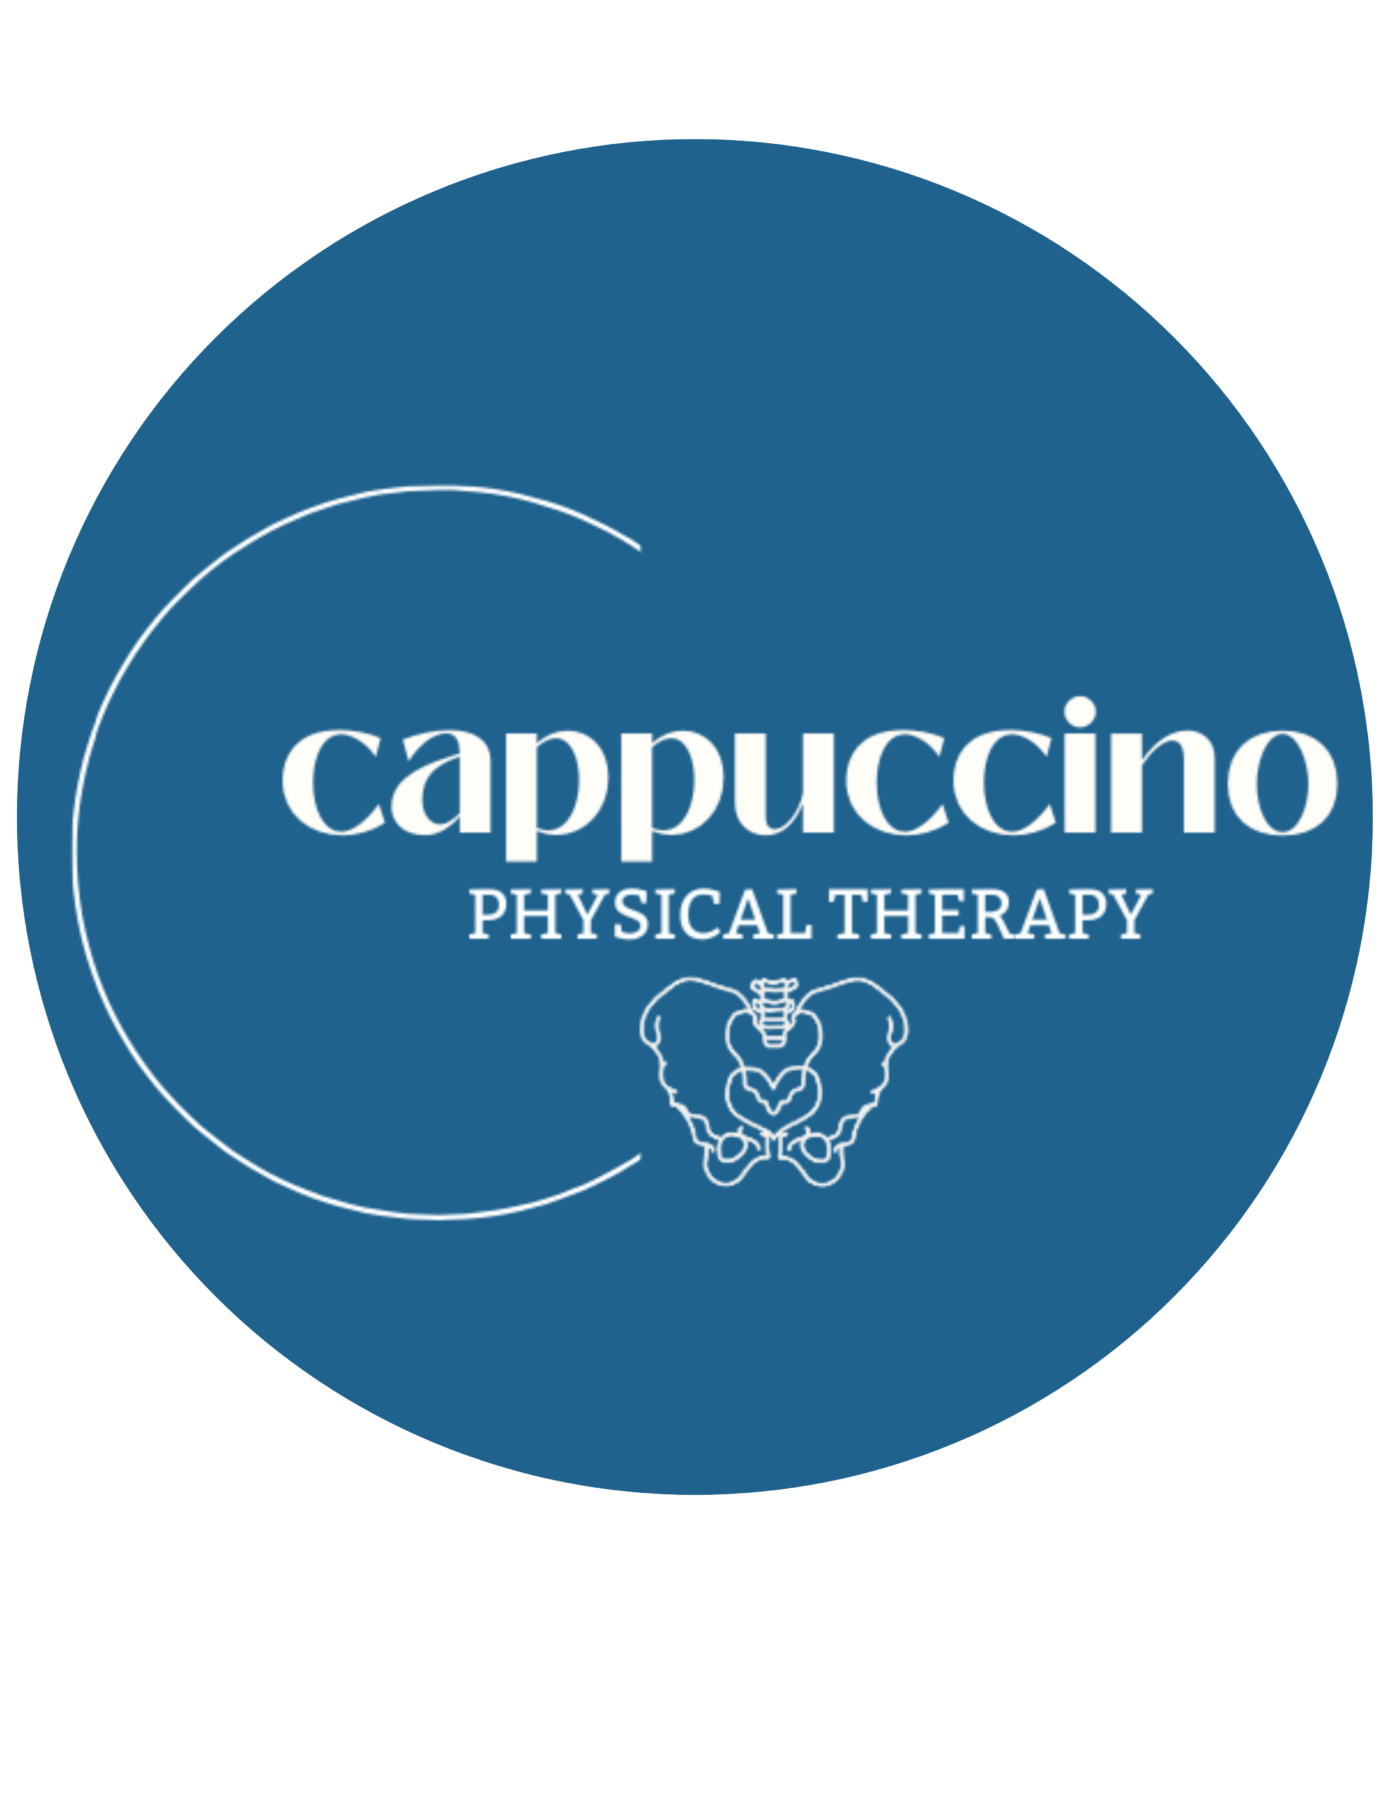 Cappuccino Physical Therapy